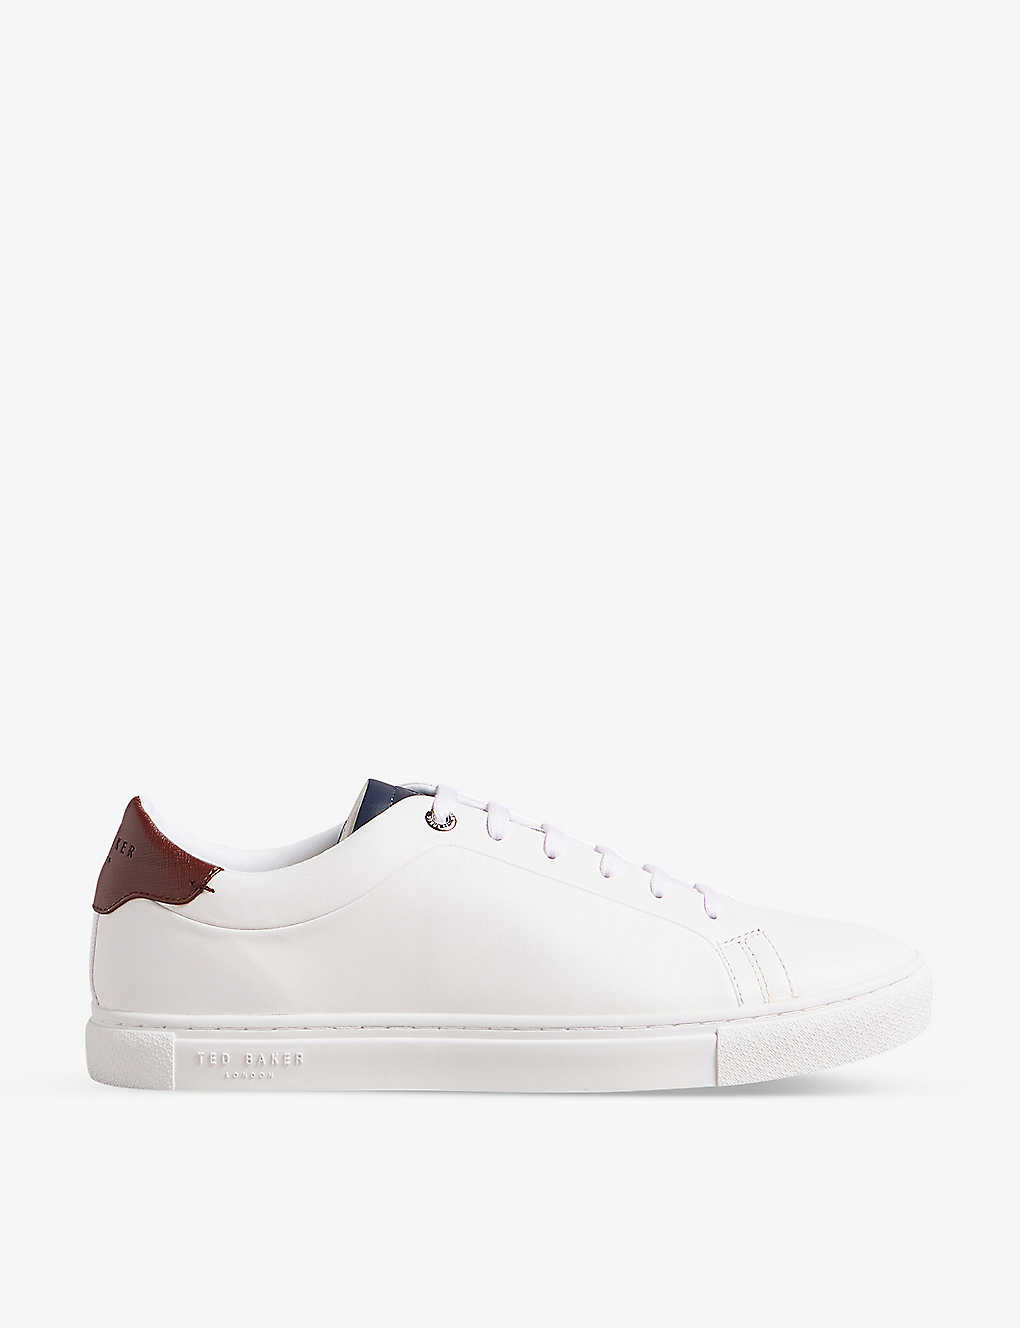 TED BAKER TED BAKER MENS WHITE-RED TRIBOLA LOGO-EMBOSSED LEATHER TRAINERS,63925778